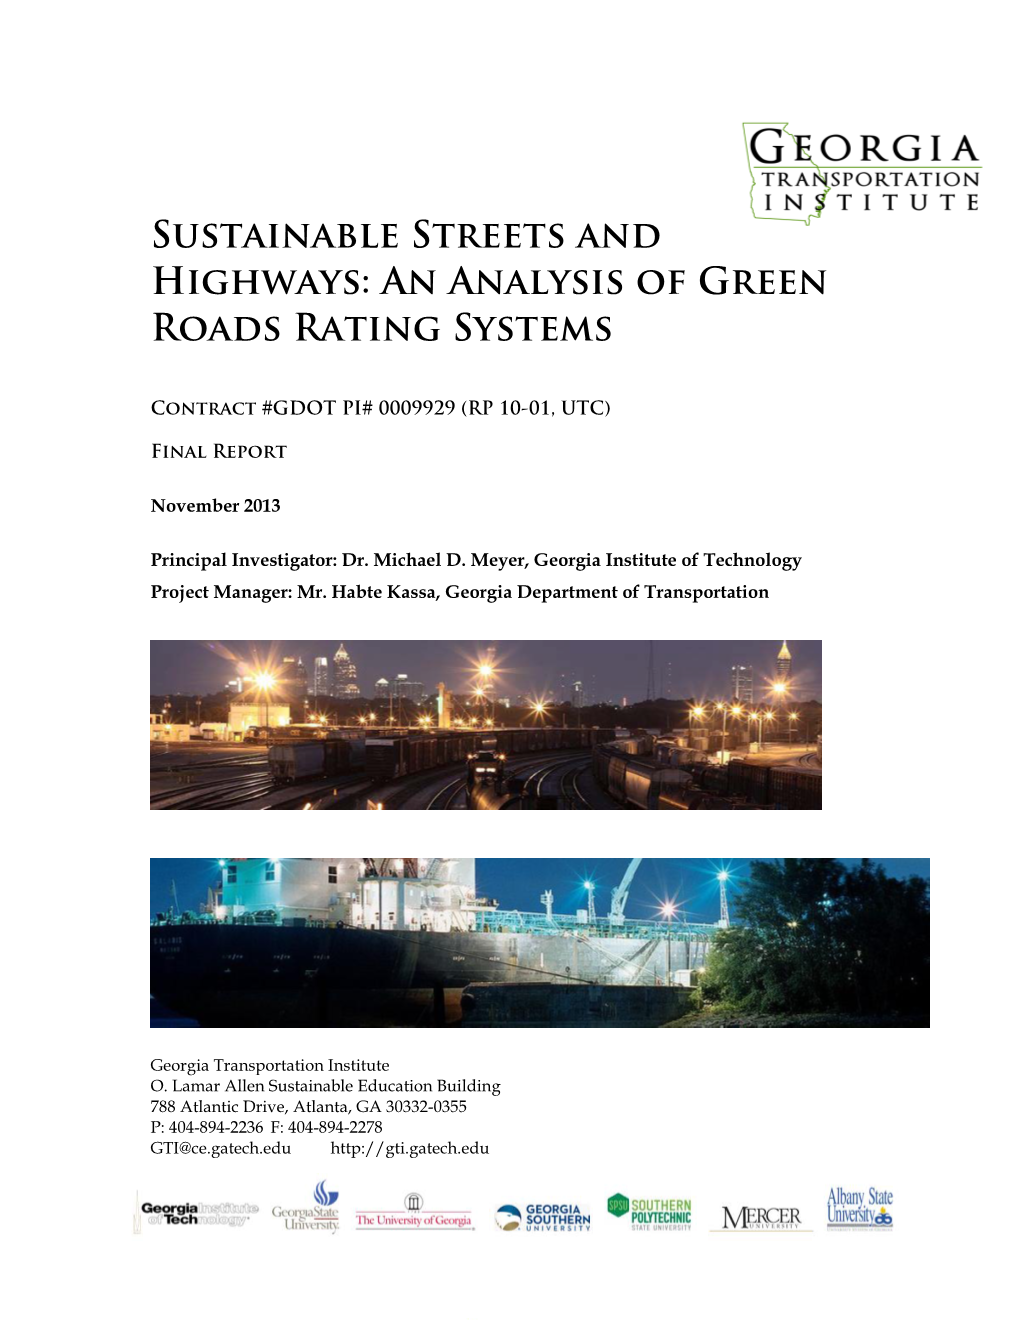 Sustainable Streets and Highways: an Analysis of Green Roads Rating Systems